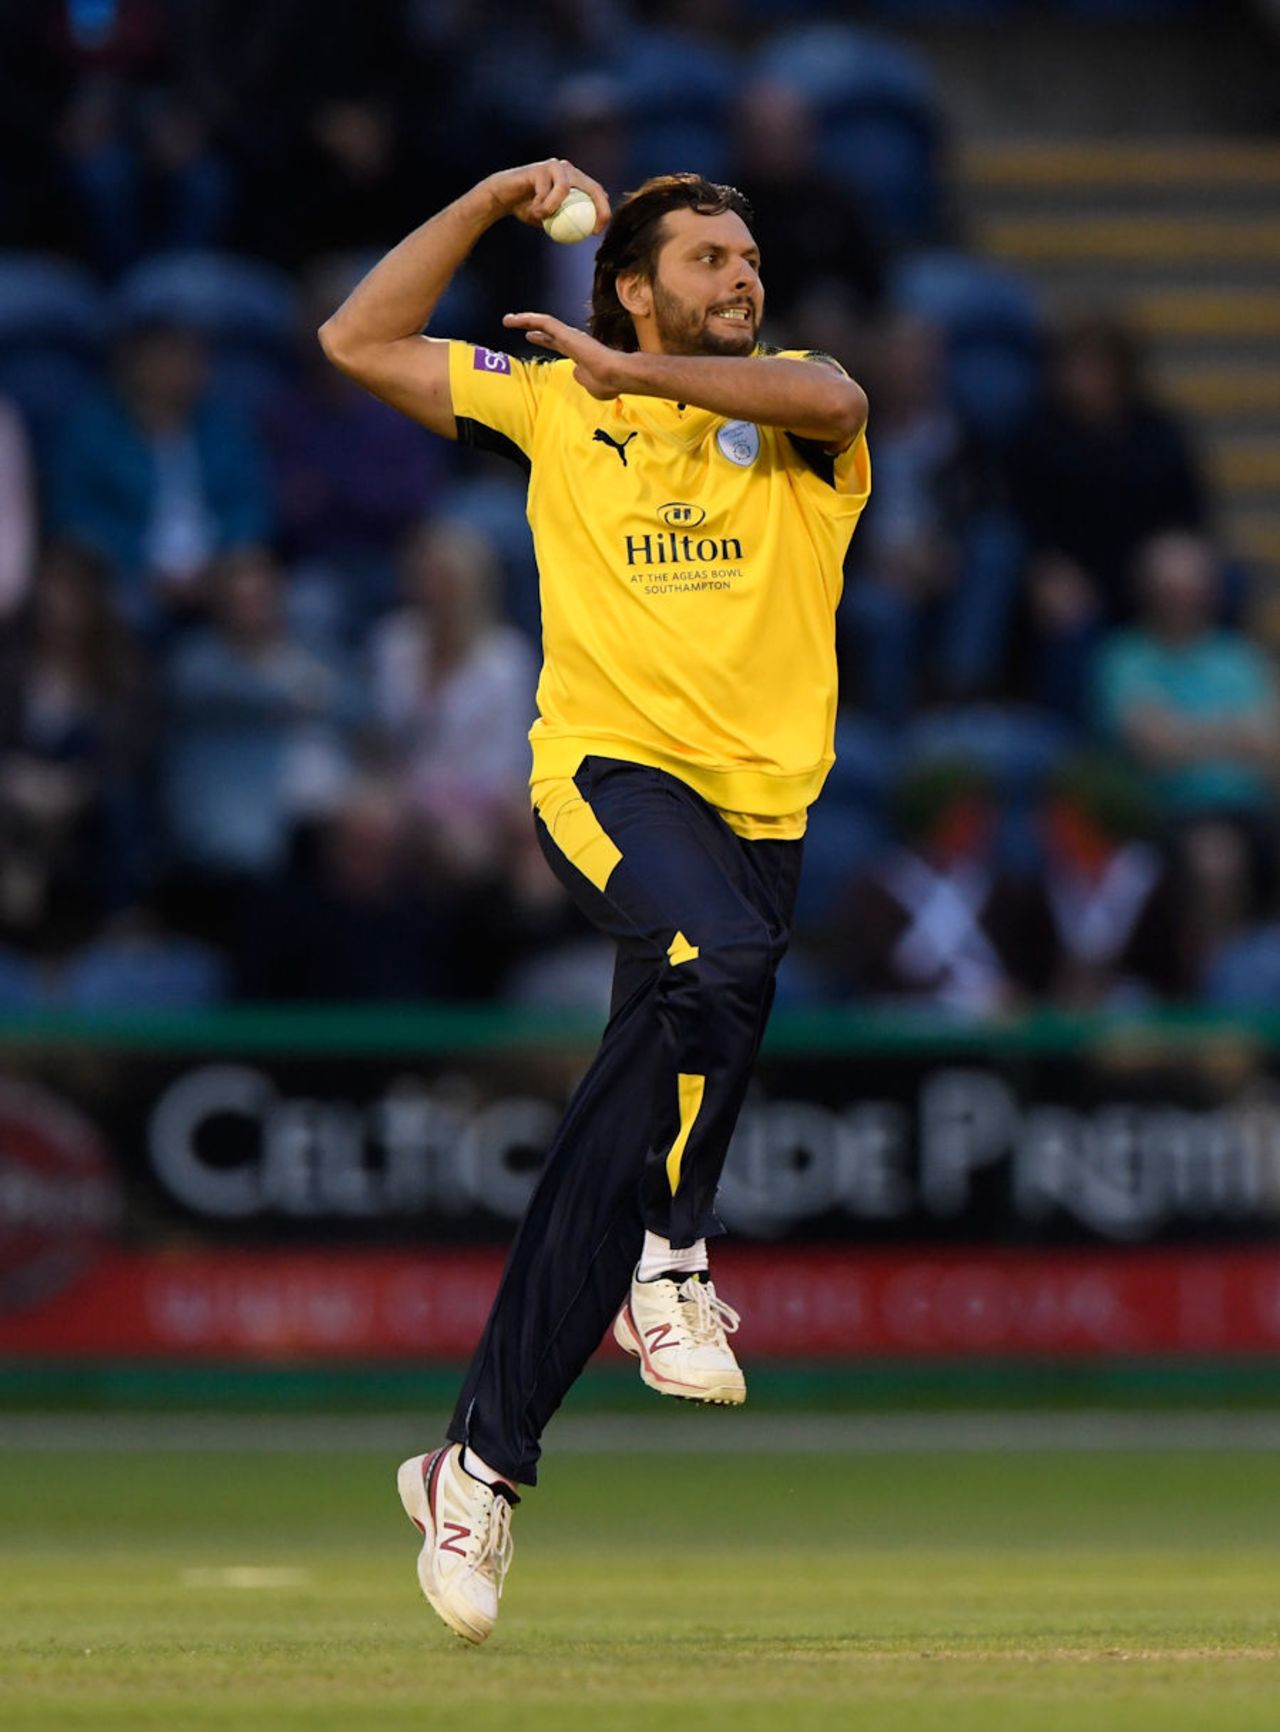 Shahid Afridi took four wickets in Cardiff, Glamorgan v Hampshire, NatWest T20 Blast, South Group, July 8, 2017